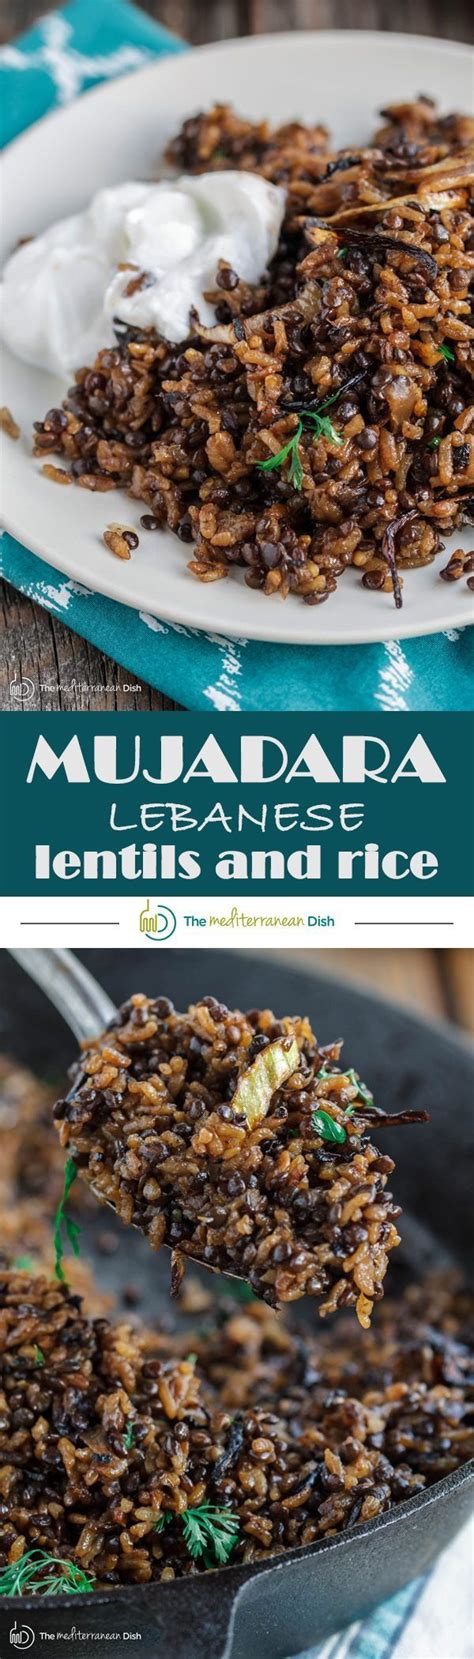 Mujadara Lentils And Rice With Crispy Onions The Mediterranean Dish